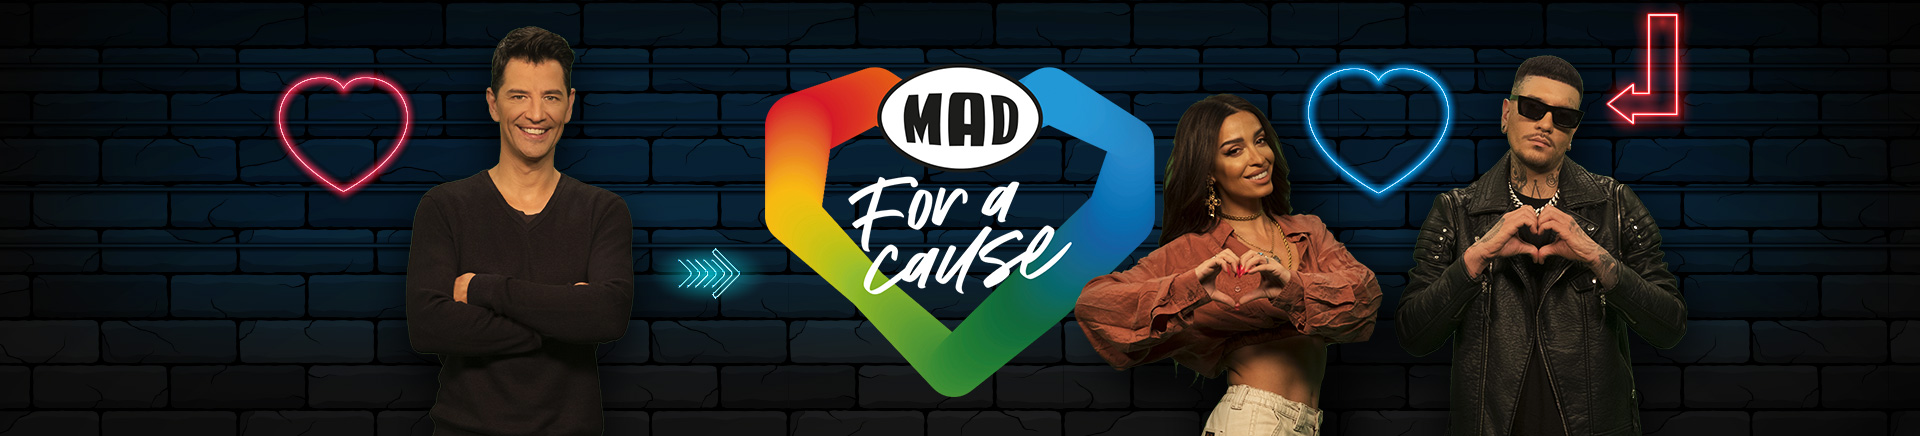 MAD for a Cause (1)